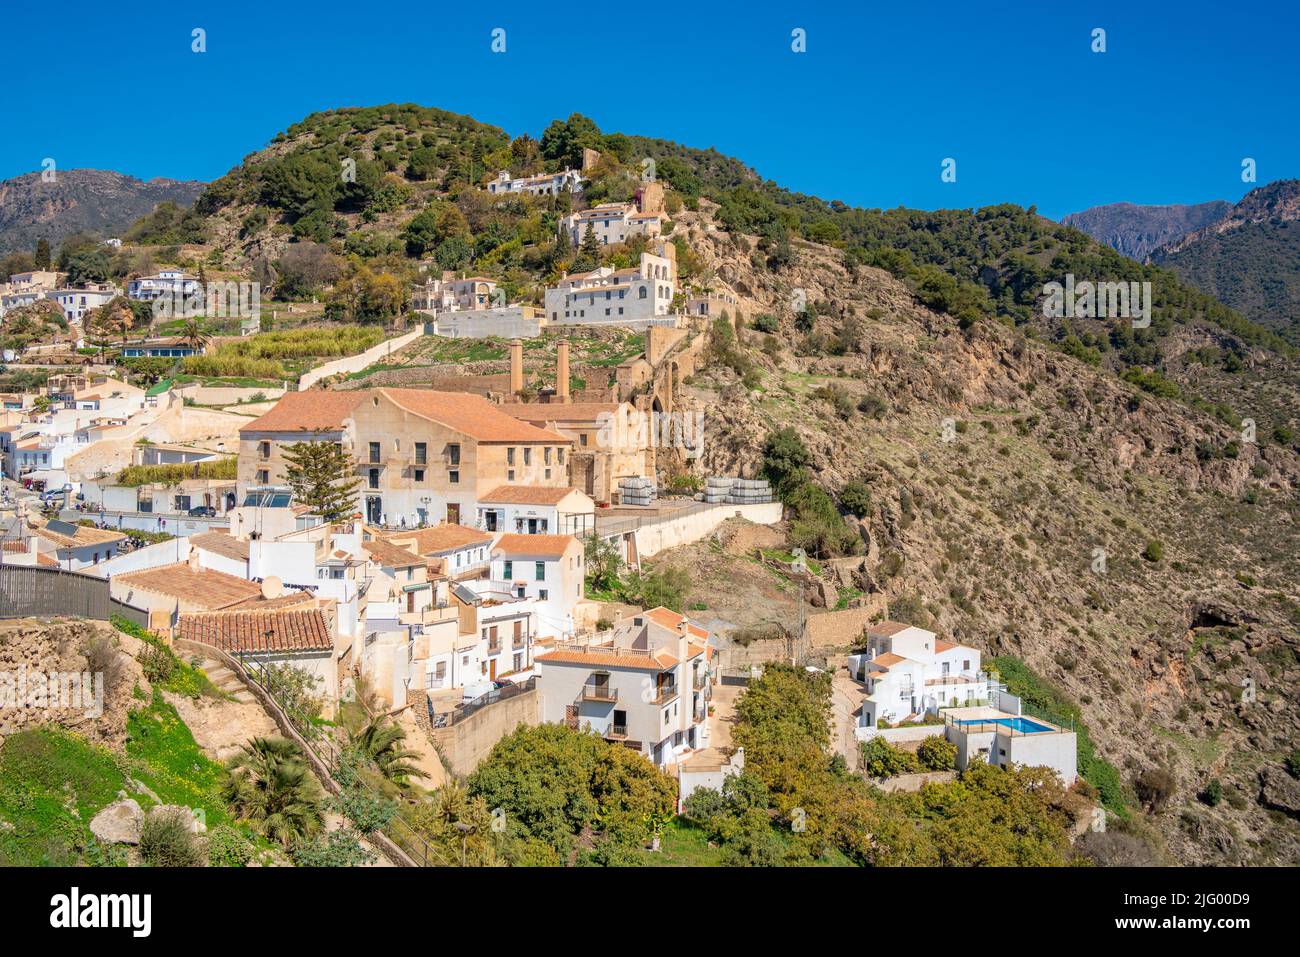 View of whitewashed houses and mountains in background, Frigiliana, Malaga Province, Andalucia, Spain, Mediterranean, Europe Stock Photo